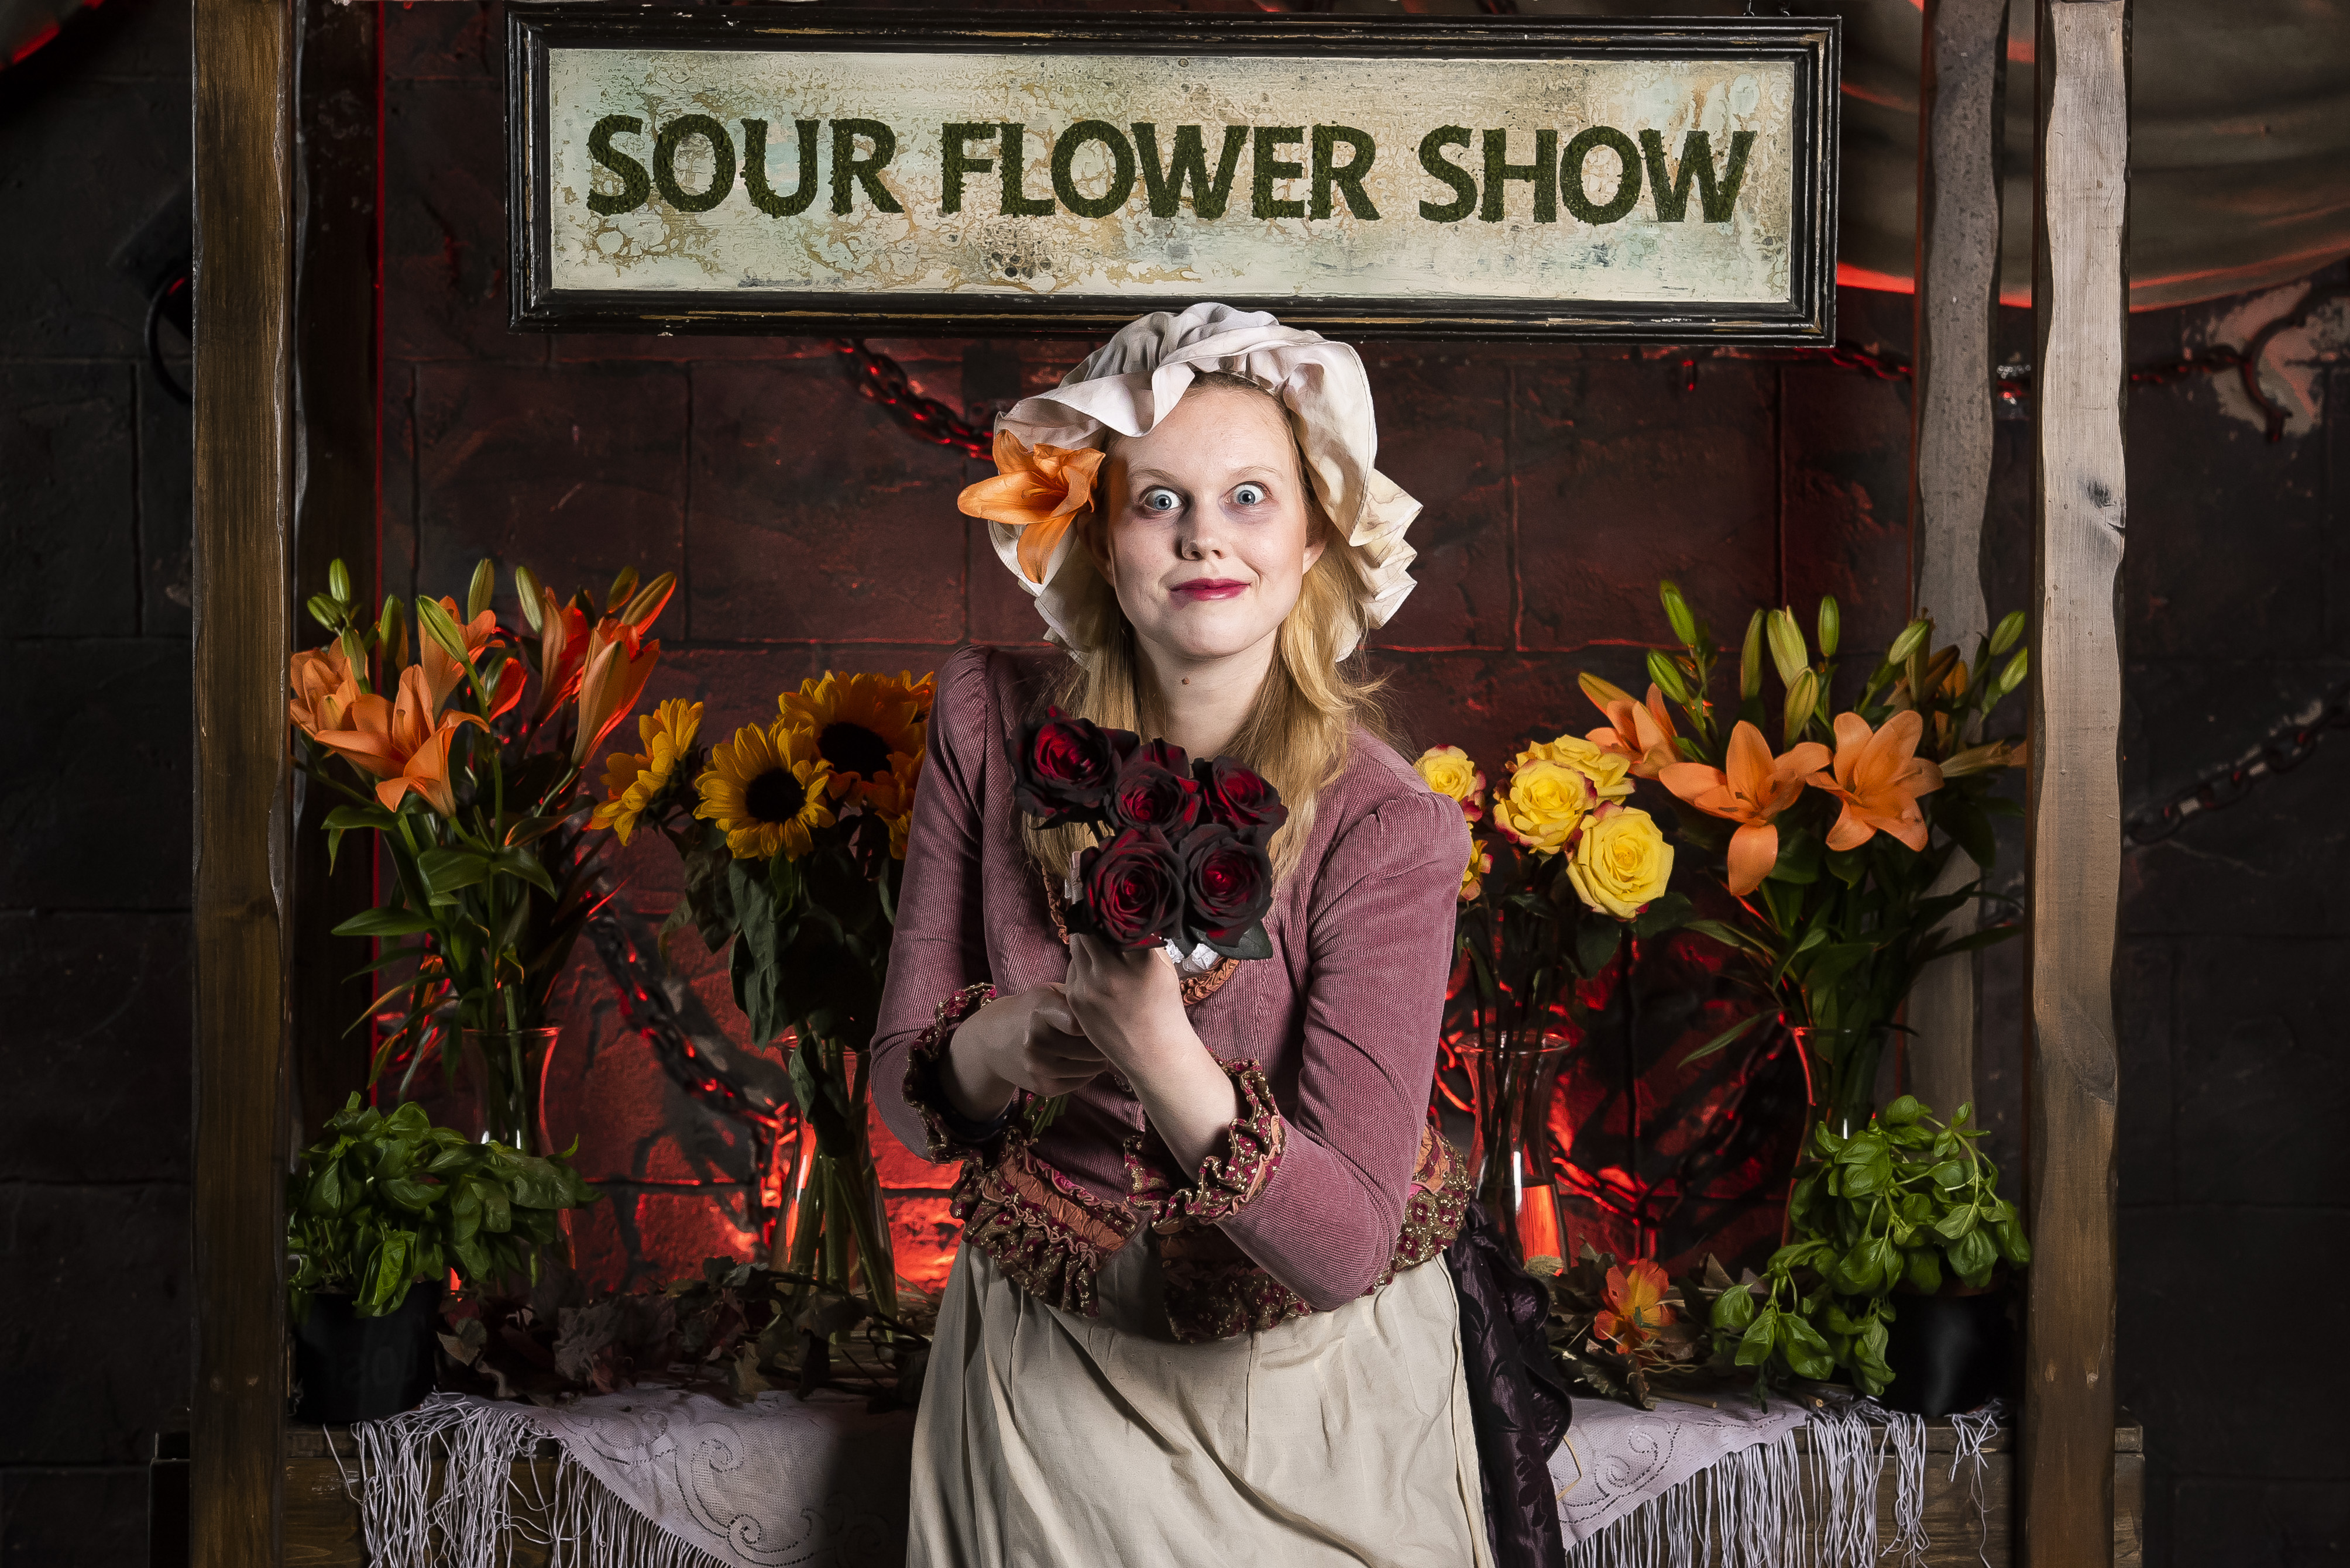 Sour Flower Show | The London Dungeon